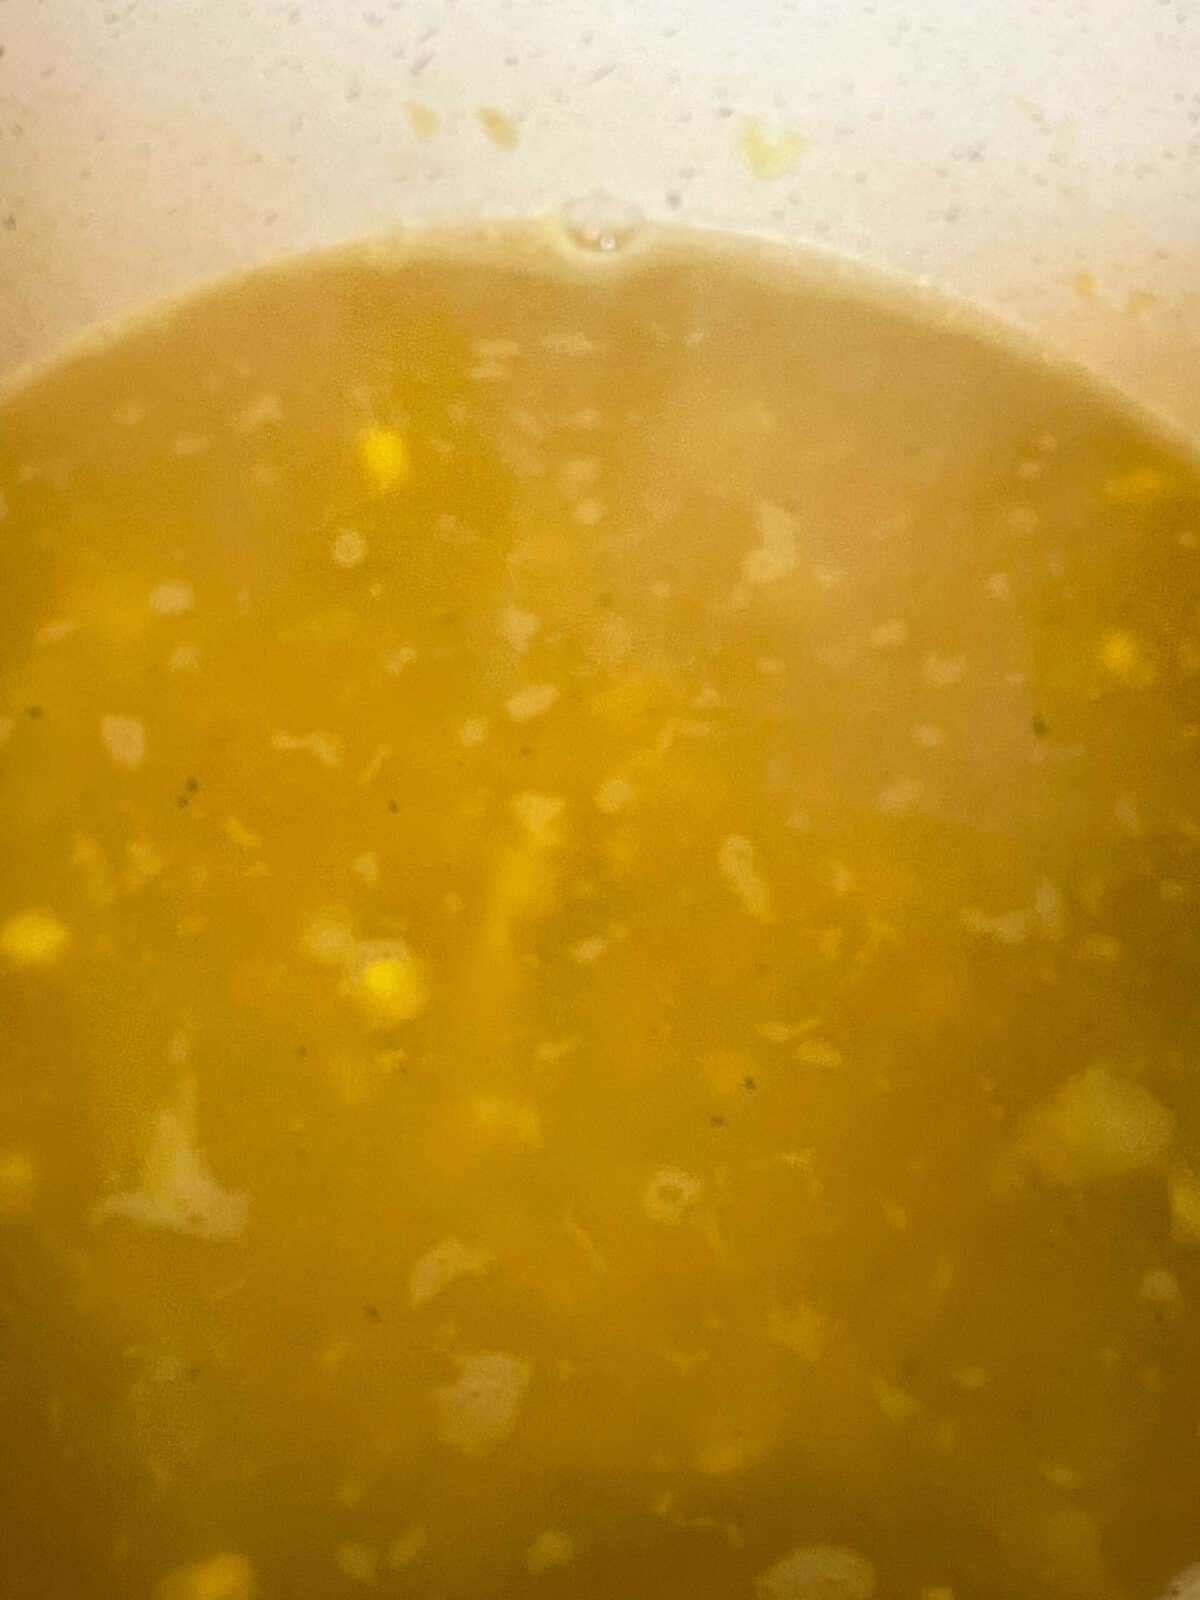 Veggie broth added to veggies cooking in soup pan.